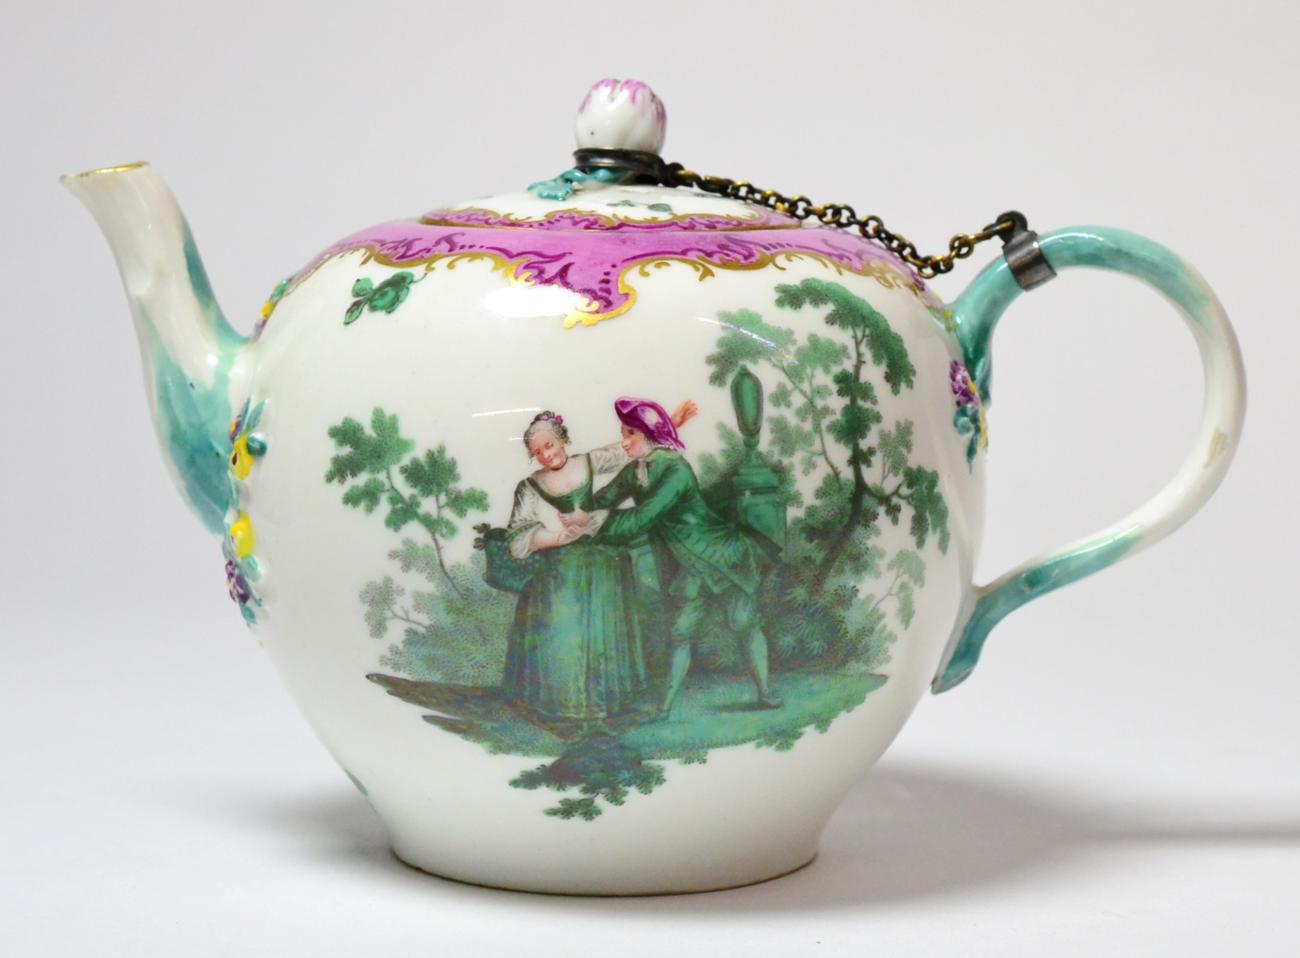 An Academic Period Meissen Porcelain Teapot and Cover, circa 1765, of ovoid form, painted in green